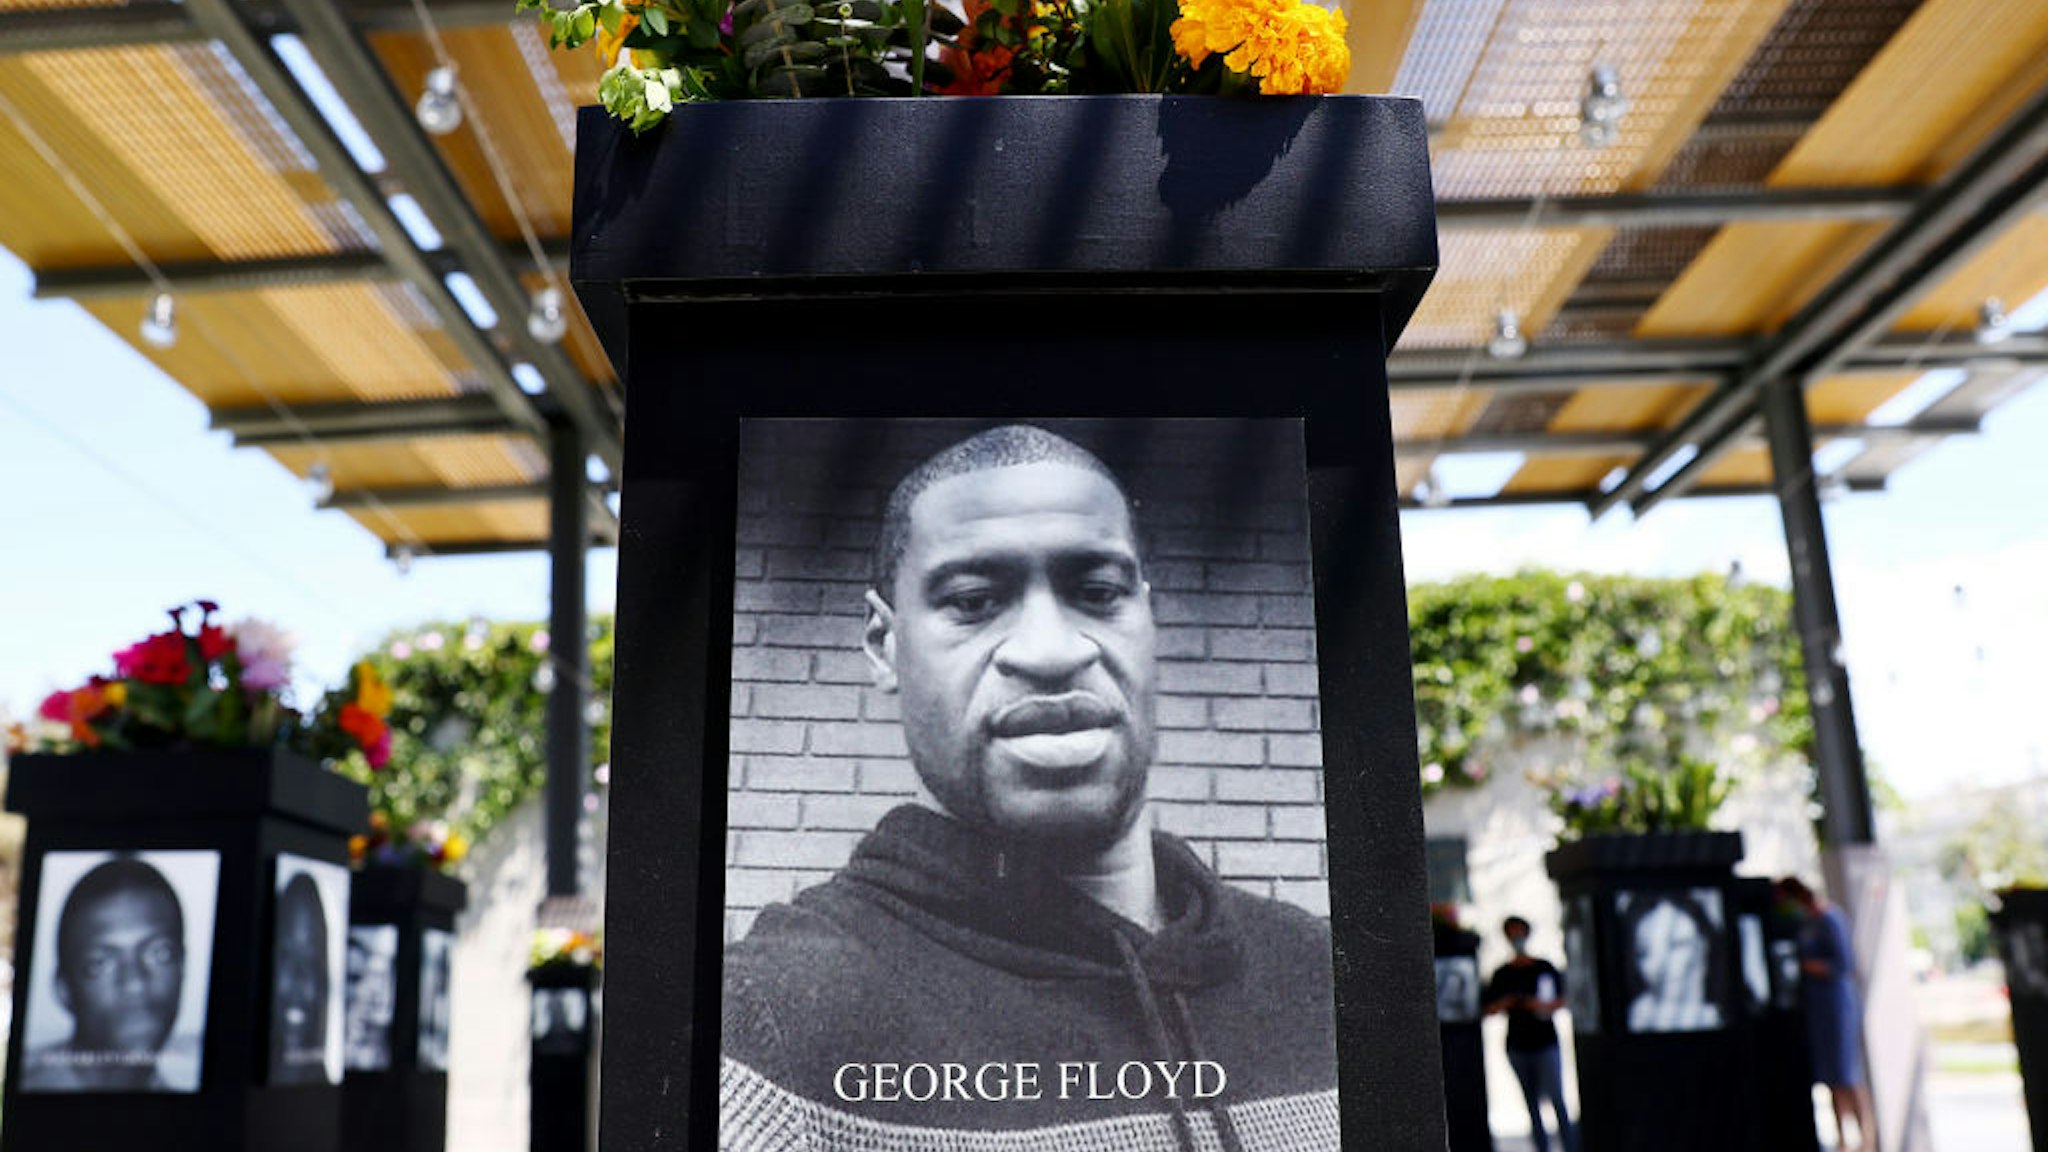 A photograph of George Floyd (C) is displayed along with other photographs at the Say Their Names memorial exhibit at Martin Luther King Jr. Promenade on July 20, 2021 in San Diego, California.